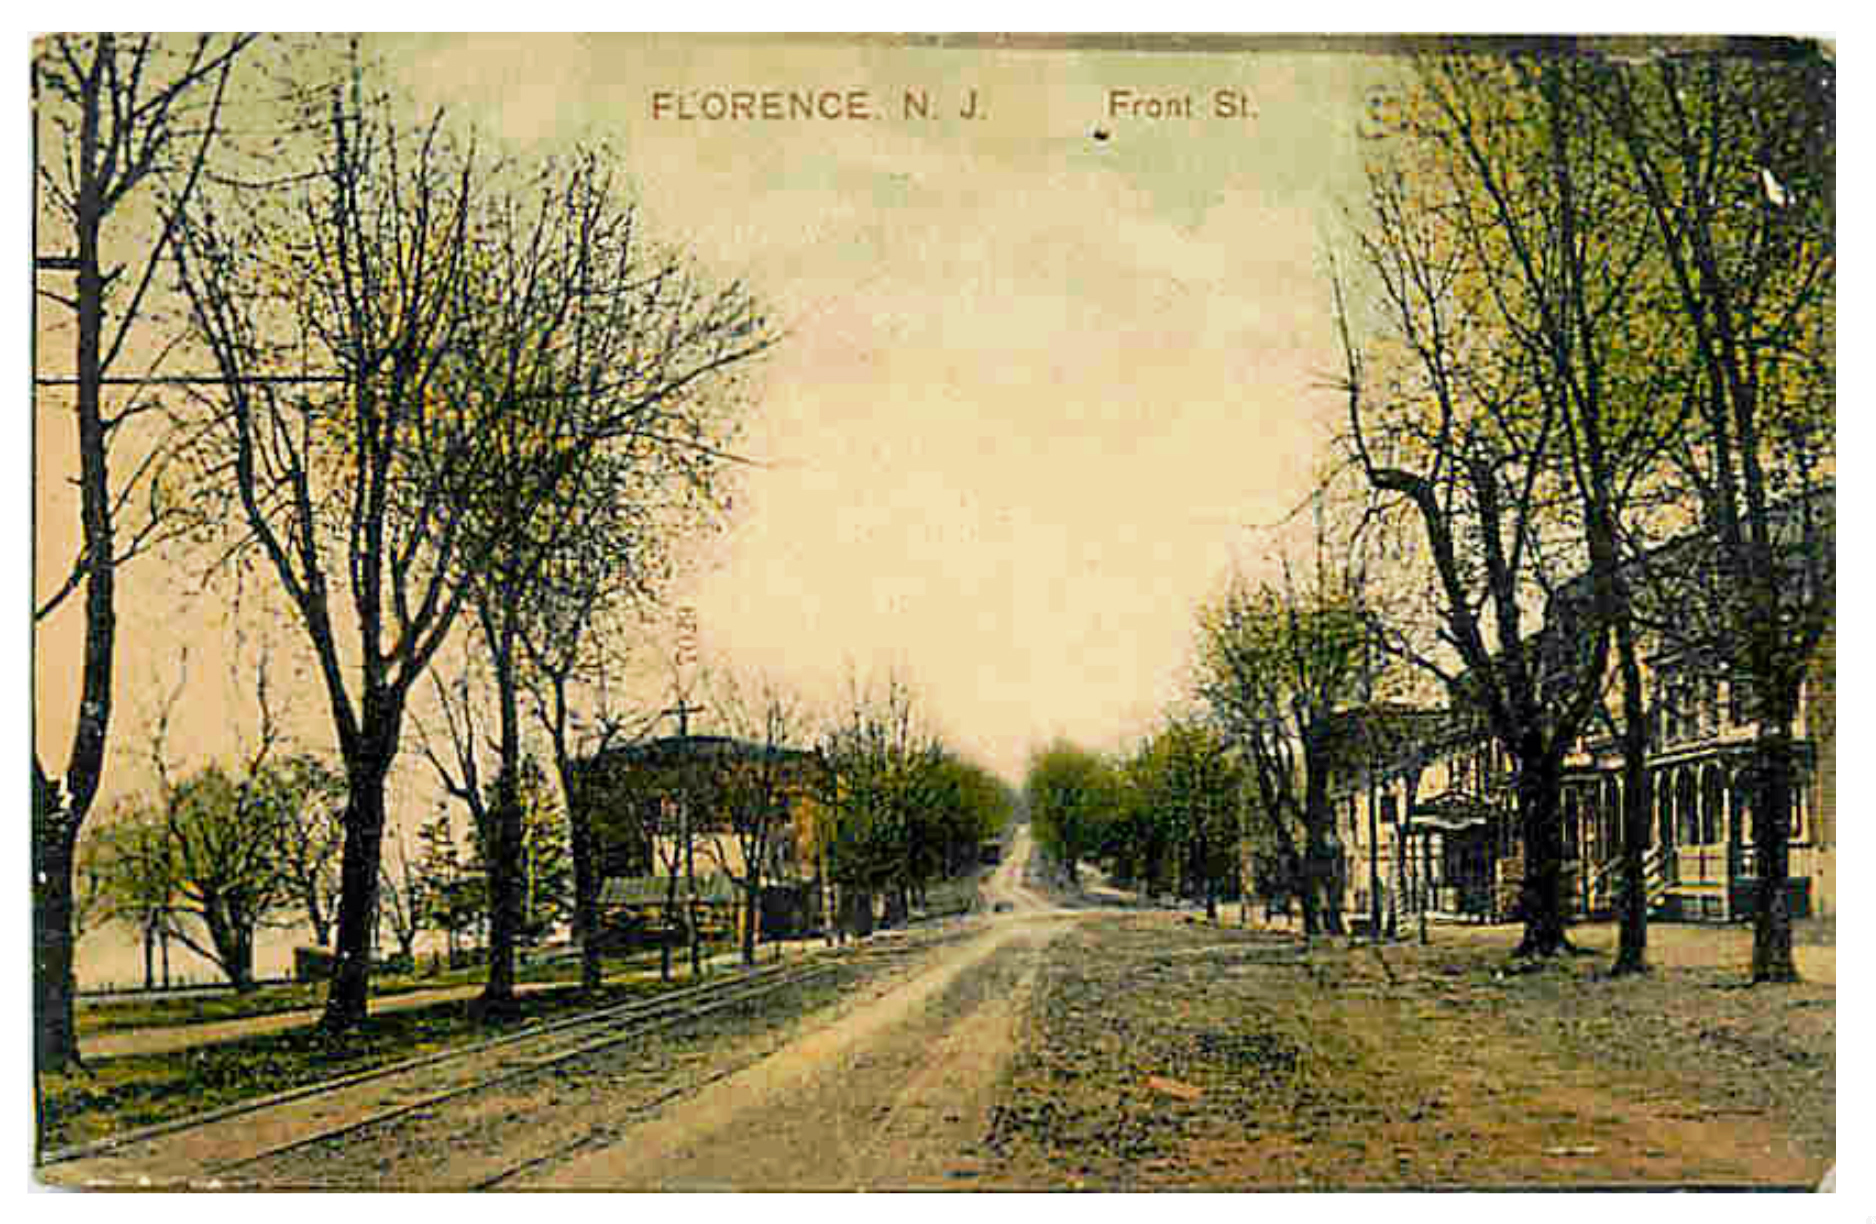 Florence - Front Street with trolley tracks - 1907